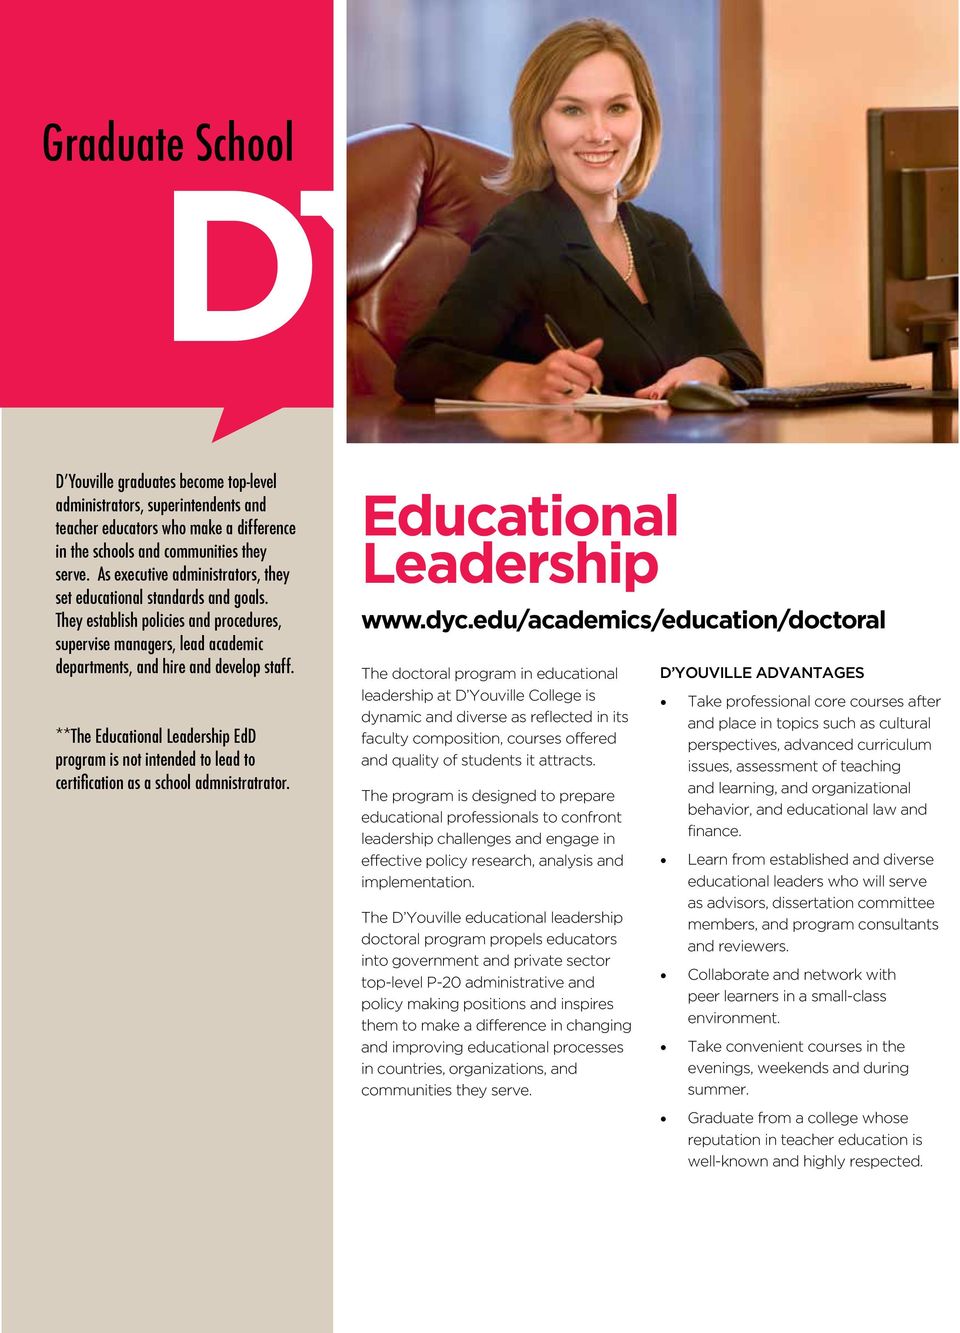 **The Educational Leadership EdD program is not intended to lead to certification as a school admnistratrator. Educational Leadership www.dyc.